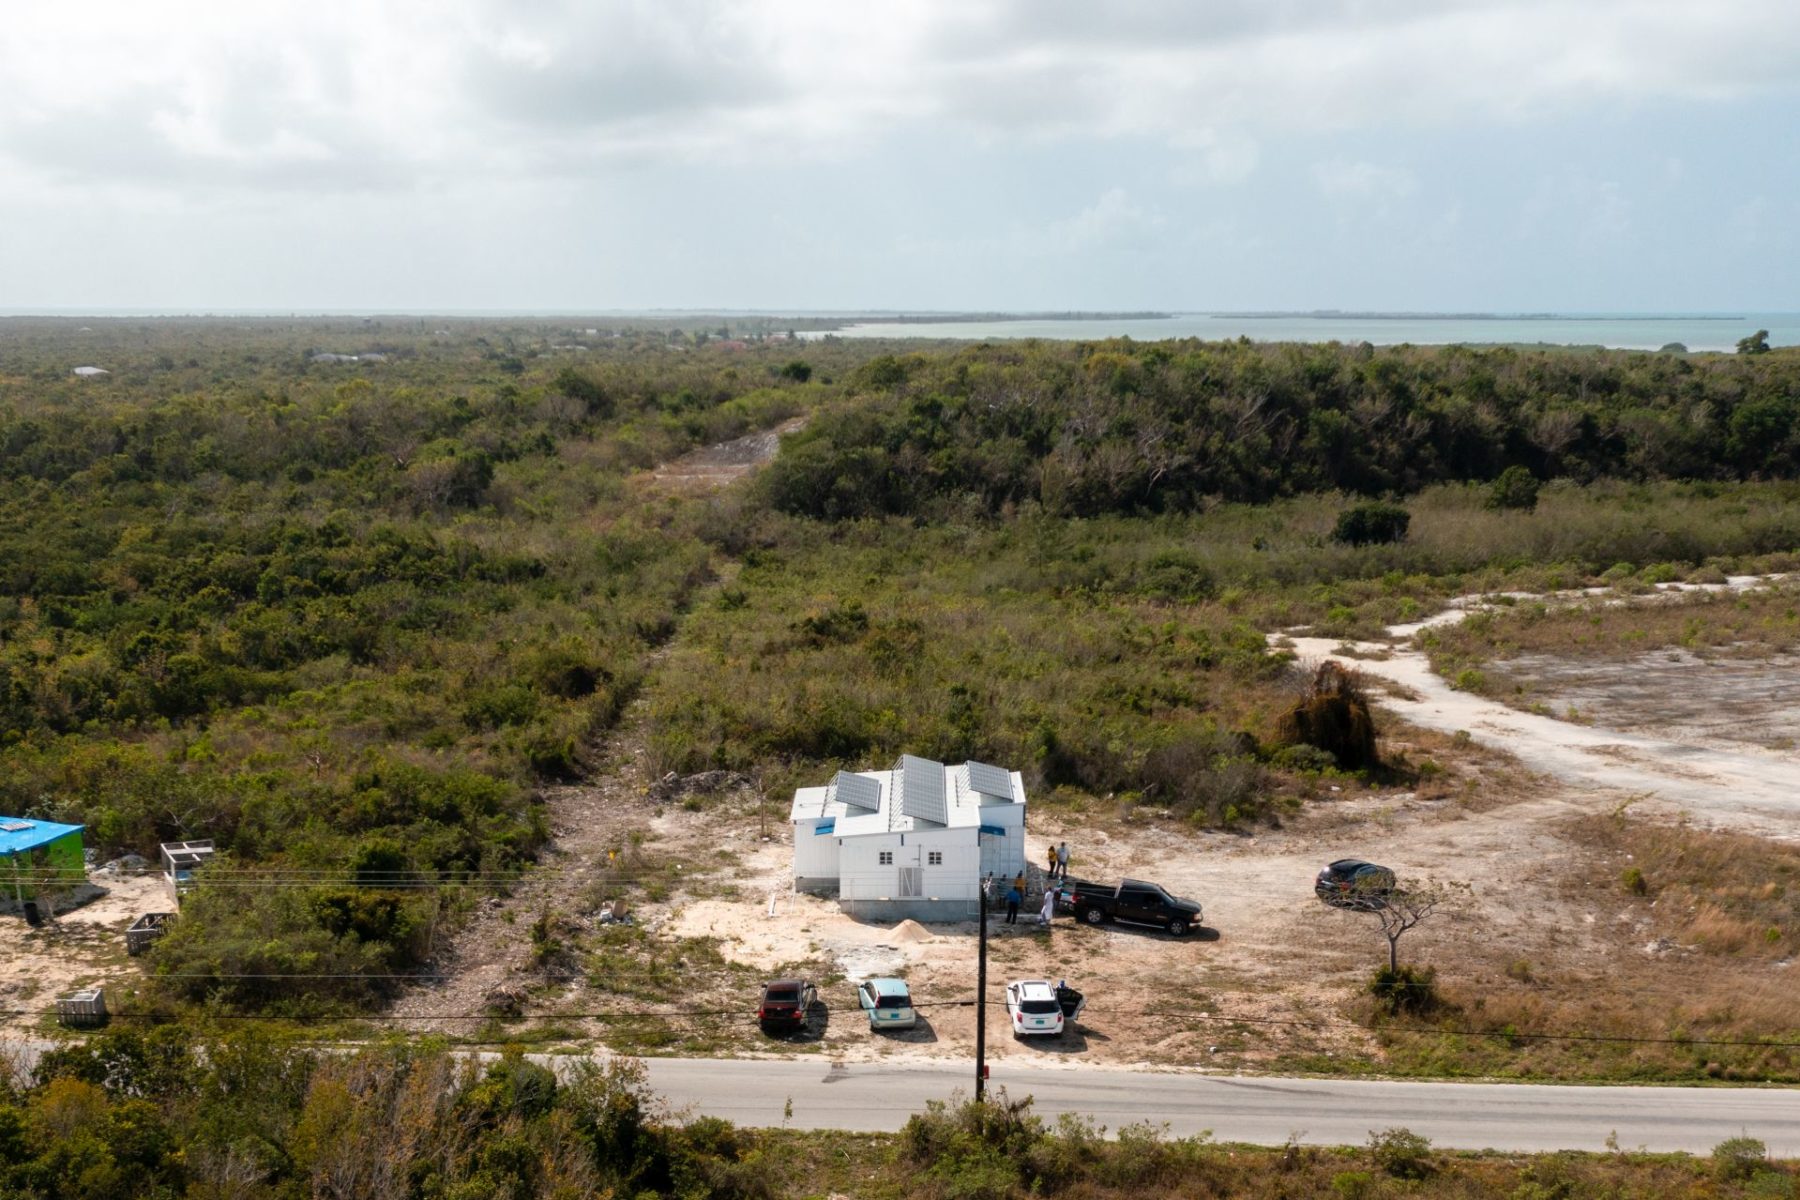 Drone view of Clinic on Moore's Island Bahamas